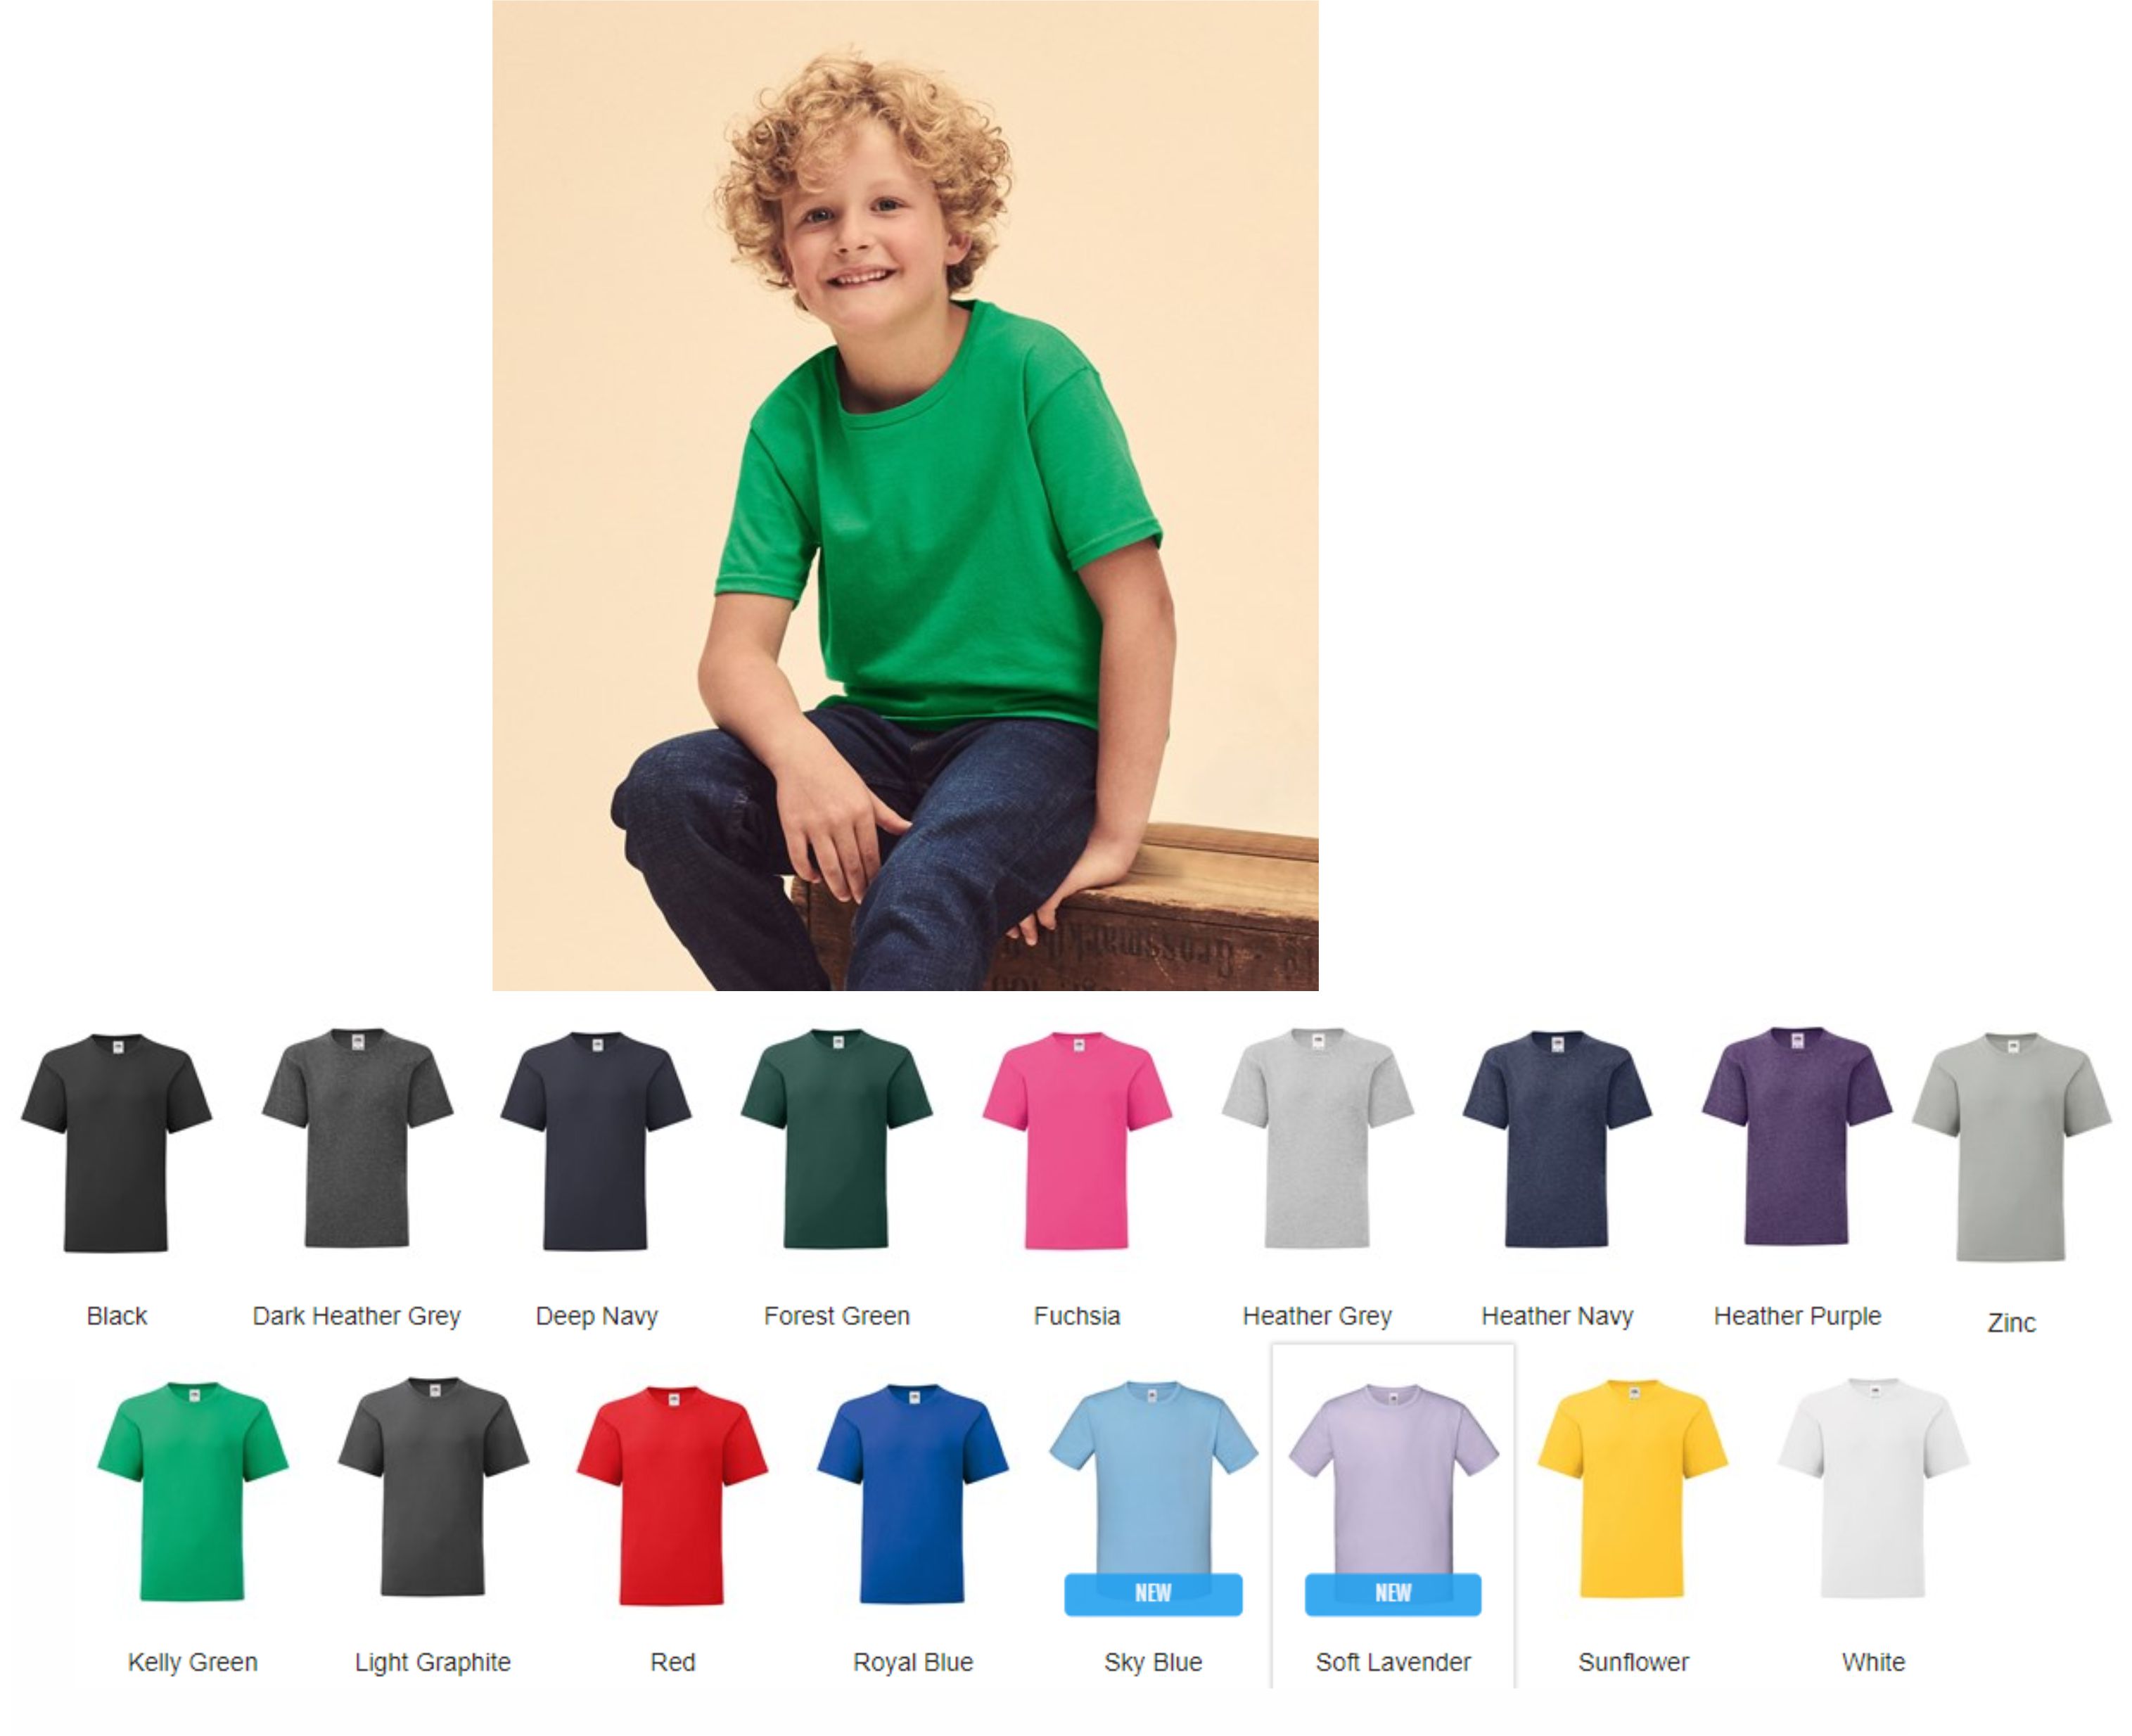 Fruit of the Loom SS150b Kids Iconic T Shirt